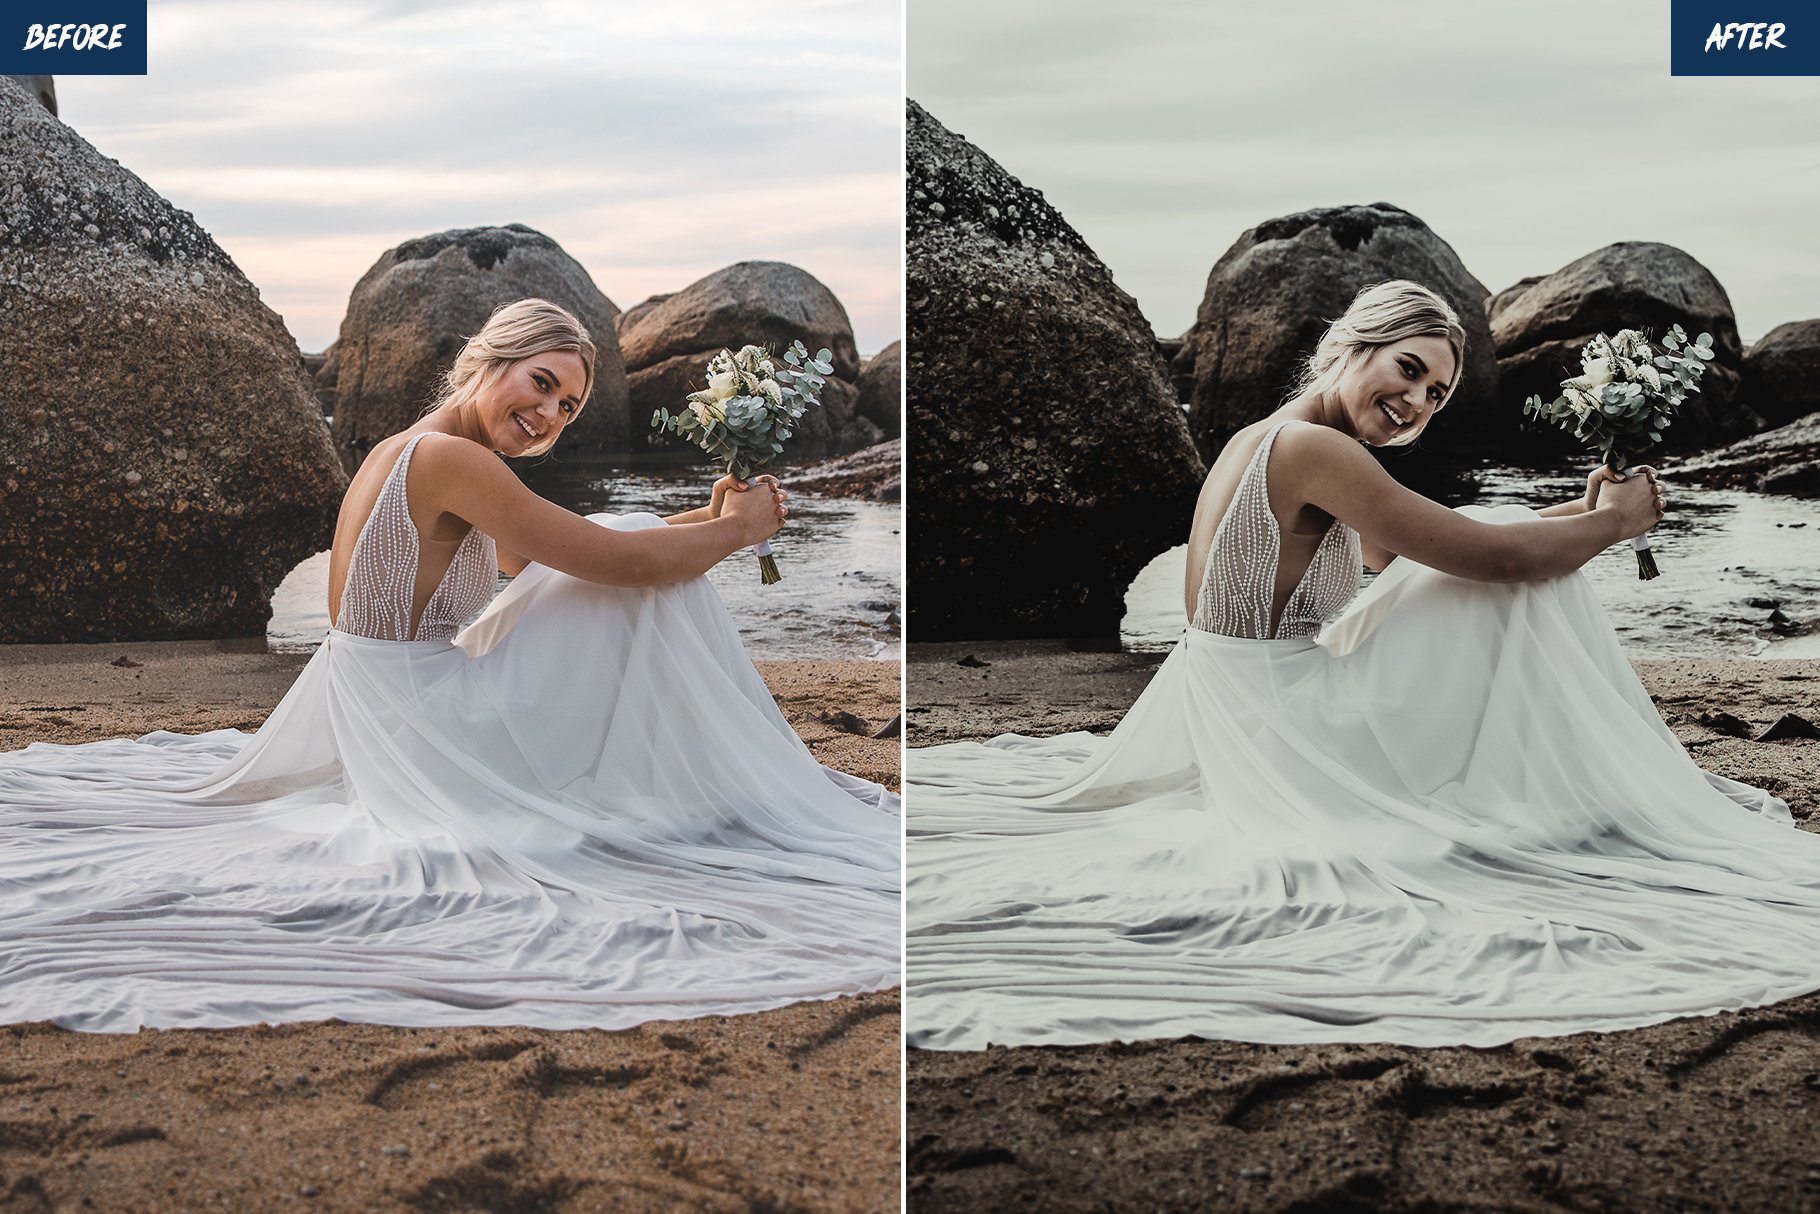 dark and moody wedding presets before and after 03 421